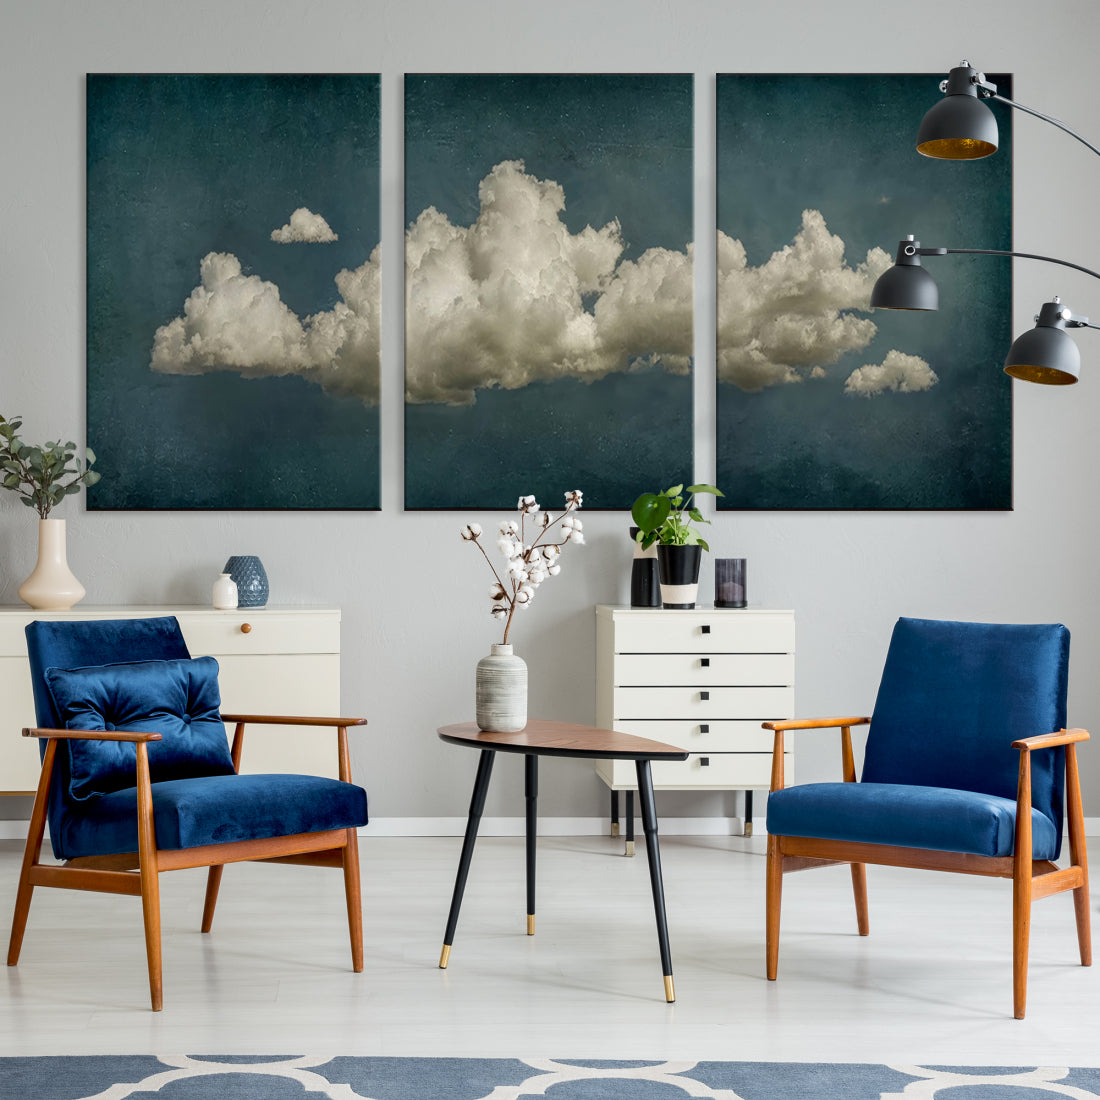 White Clouds Blue Sky Abstract Wall Art Canvas Print Framed Vintage Soft Apartment Wall Decor